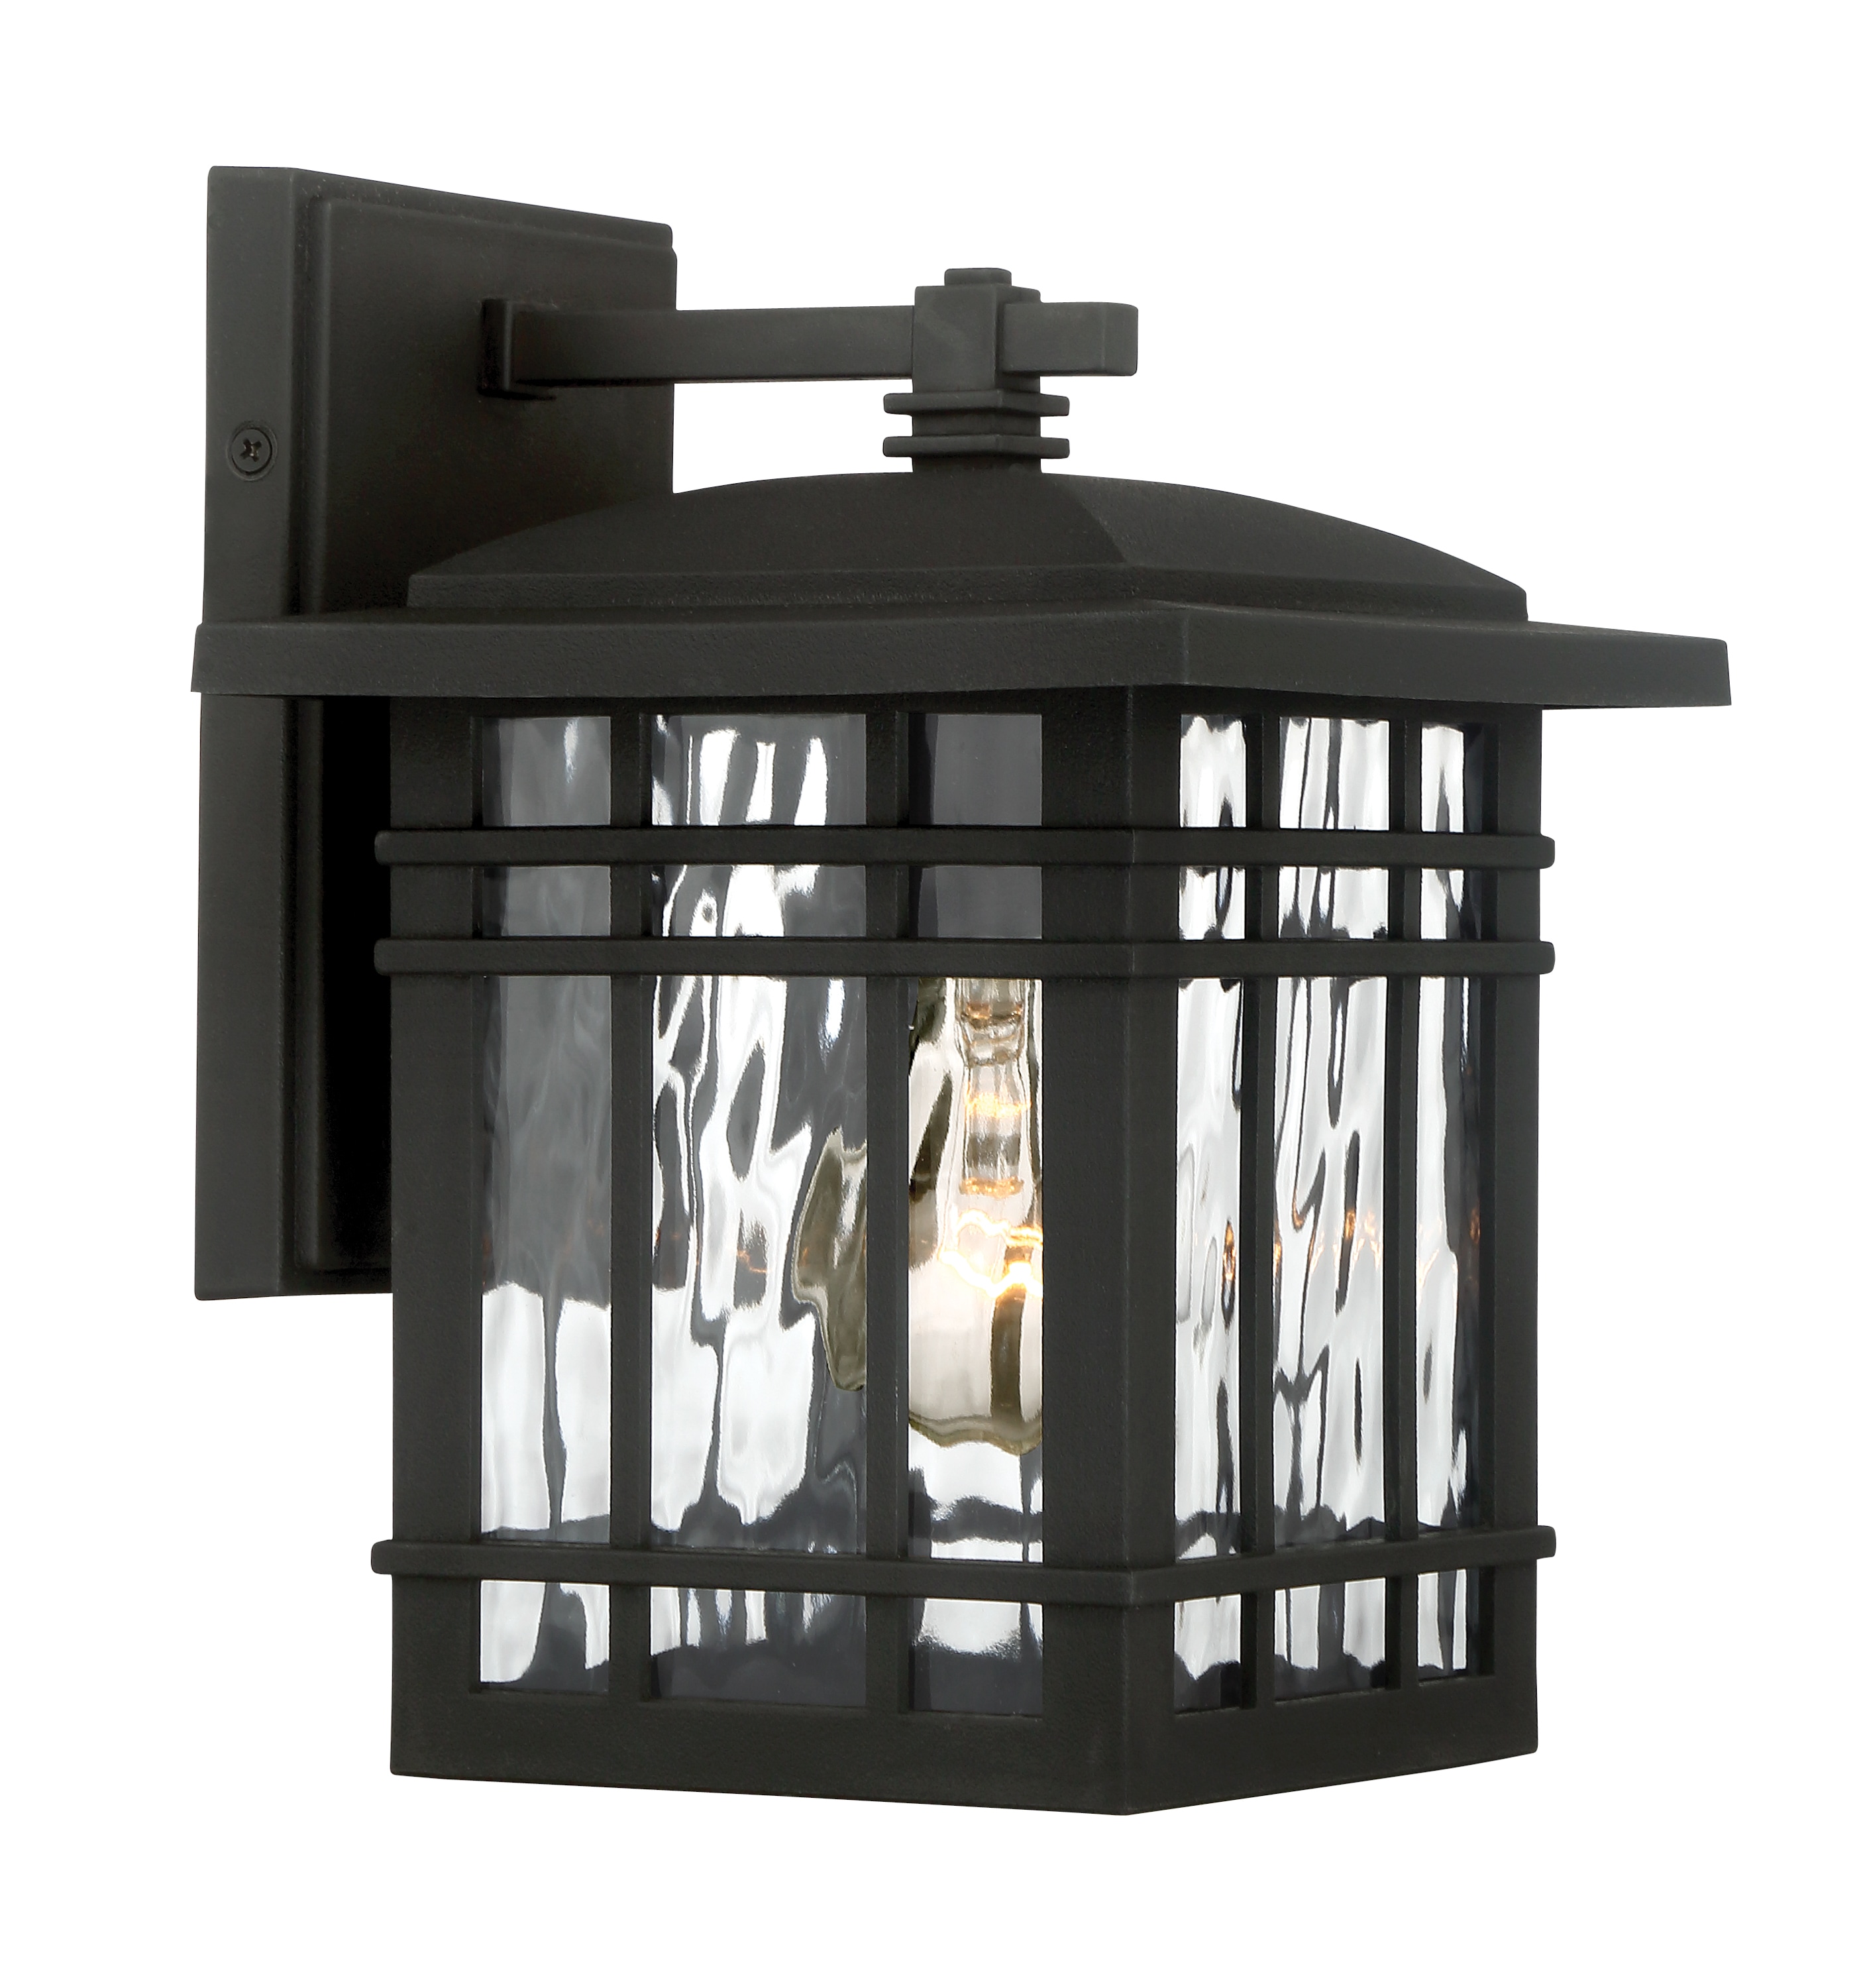 Blooma Blooma Chambly Outdoor Wall Light BNIB Opened 3663602894315 